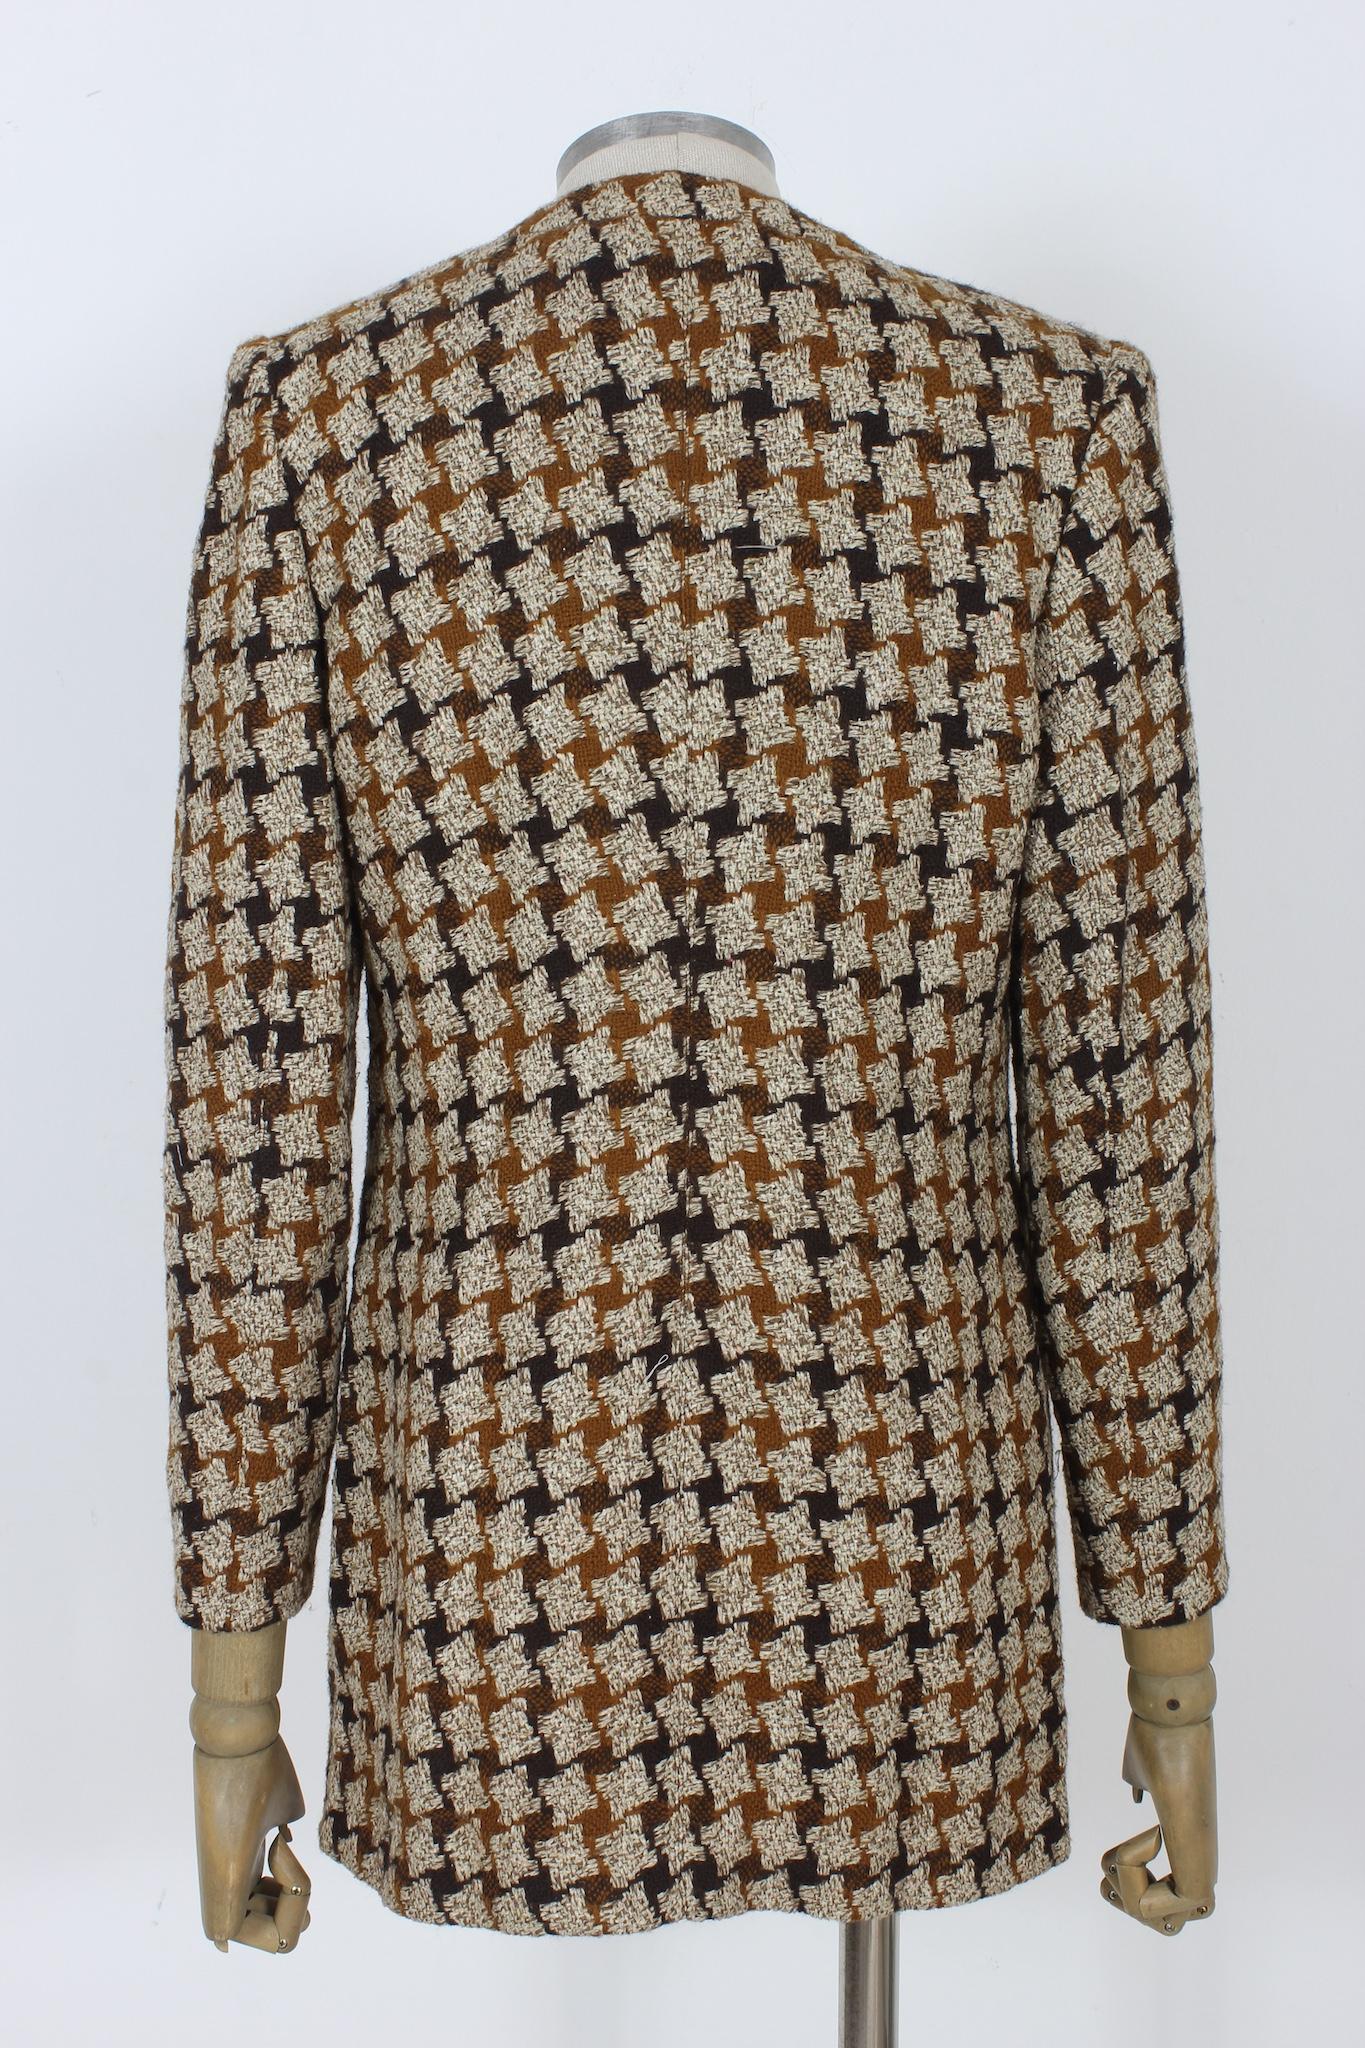 Valentino classic jacket vintage 90s. Beige and brown color with pied de poule pattern. Fabric 45% silk, 29% wool, 26% acetate, internally lined. Made in Italy.

Size: 44 It 10 Us 12 Uk

Shoulder: 42 cm
Bust/Chest: 46 cm
Sleeve: 56 cm
Length: 81cm